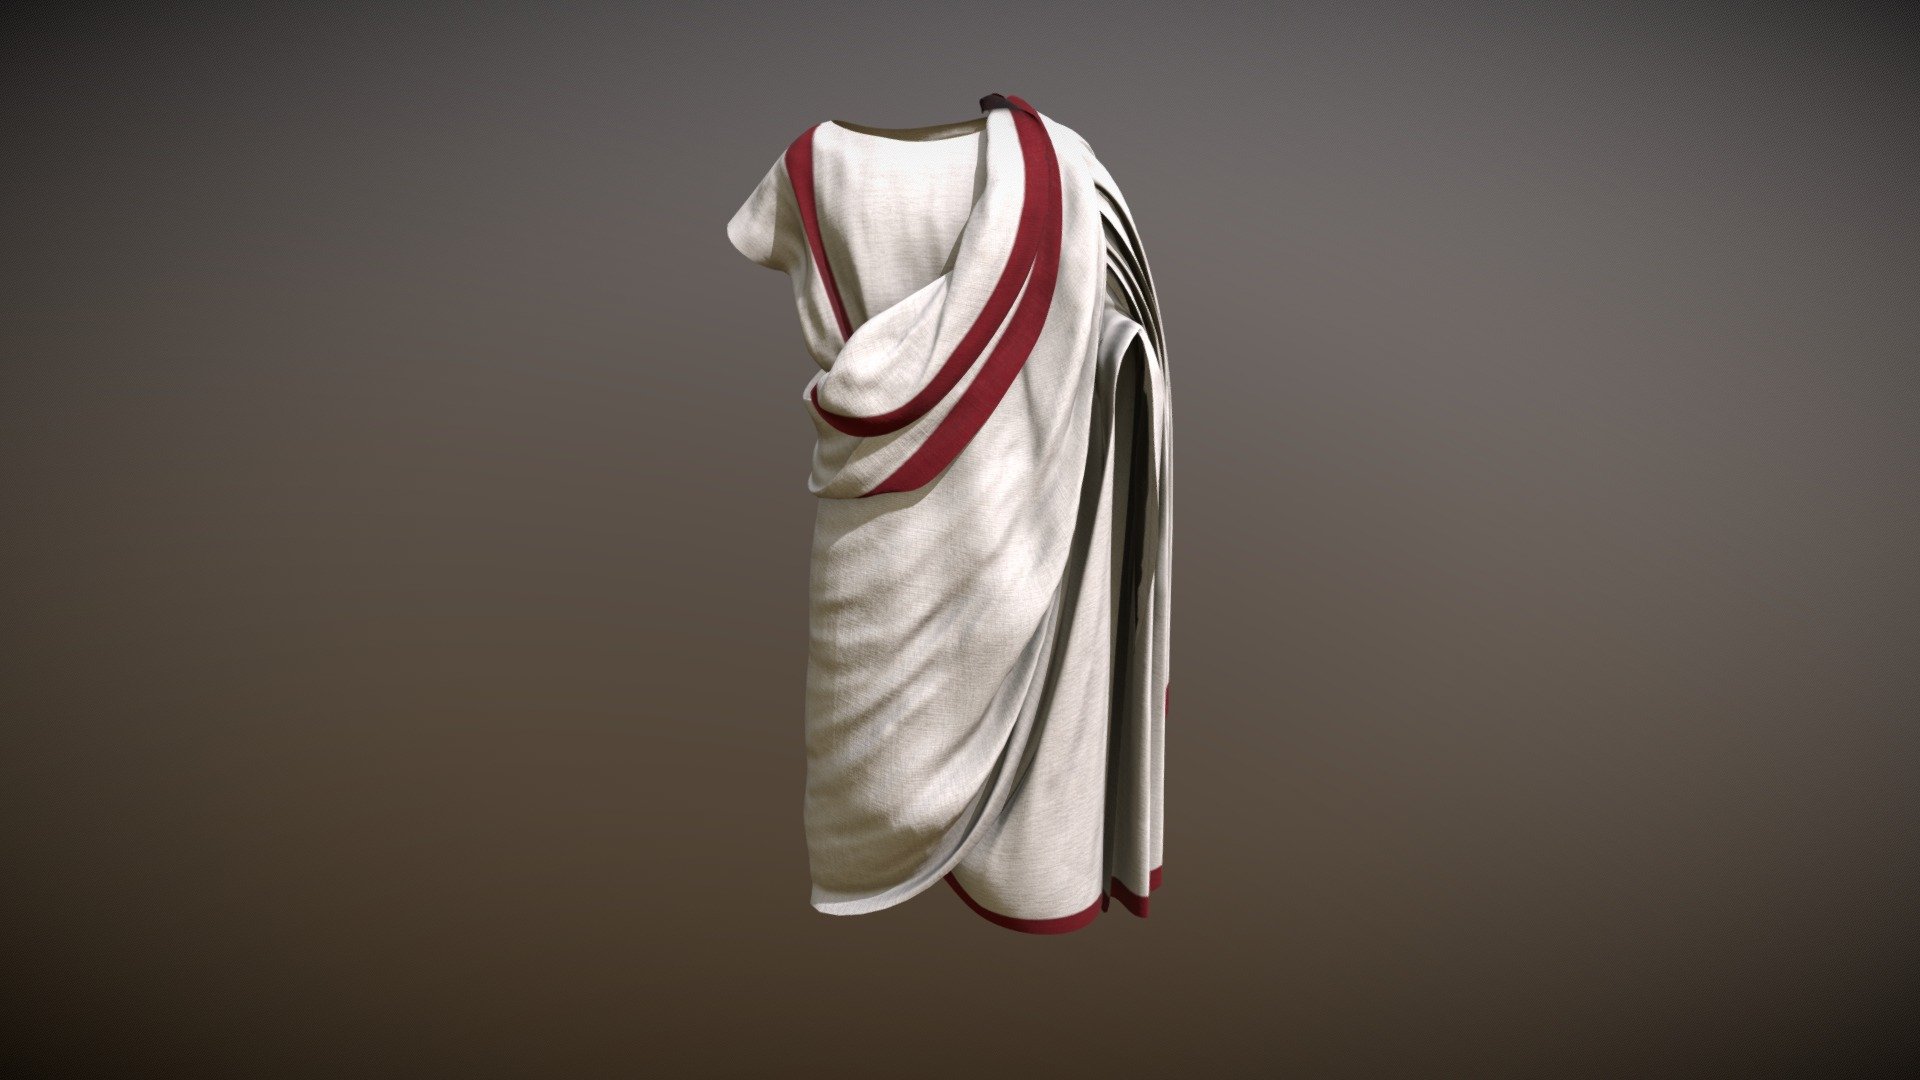 A historically accurate toga praetexta optimized for game engines. Toga praetextas are denoted by their purple or red stripe and were worn during the Roman empire by the both young boys and by senators.

An additonal texture pack for a plain white toga (toga candida) is included in the download 3d model